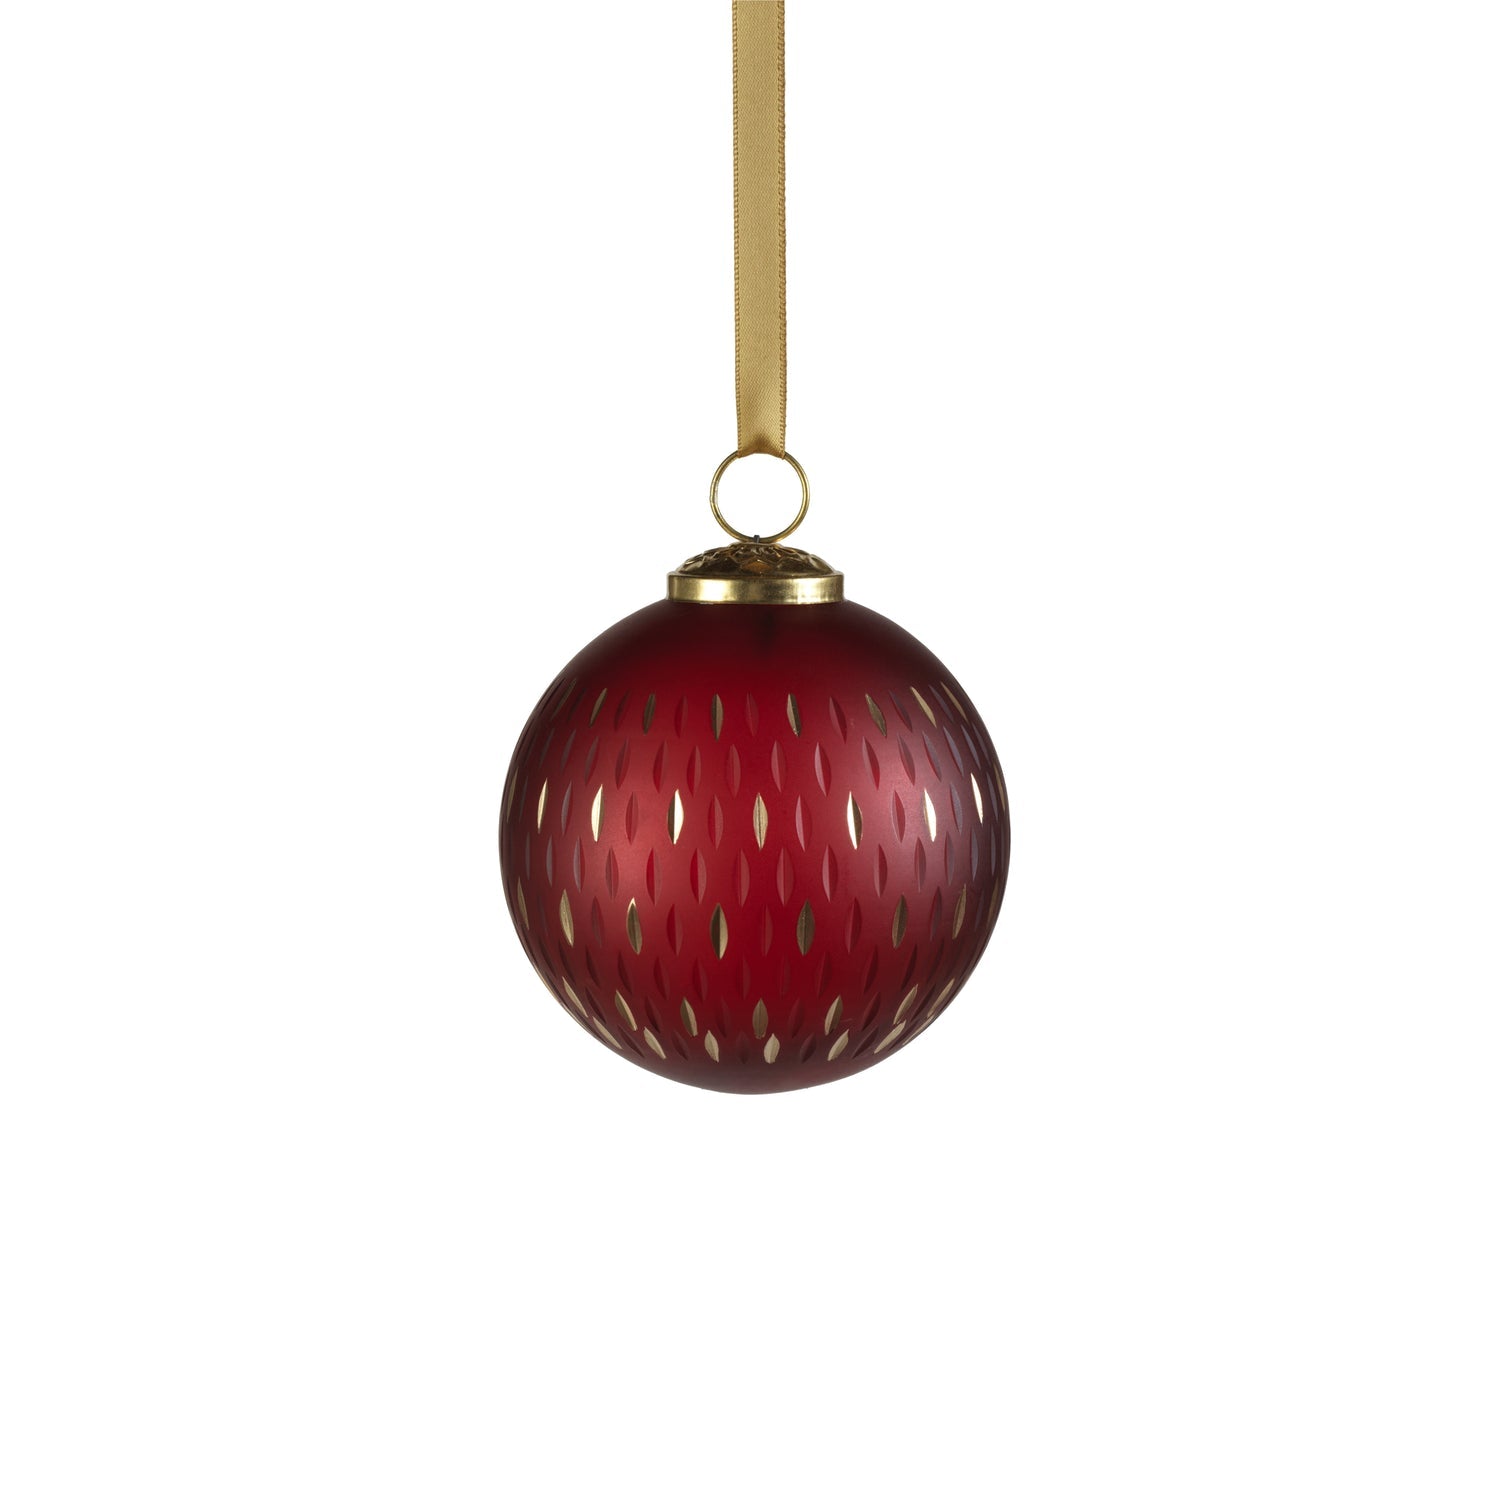 Frosted & Etched in Gold Glass Ornament - Red